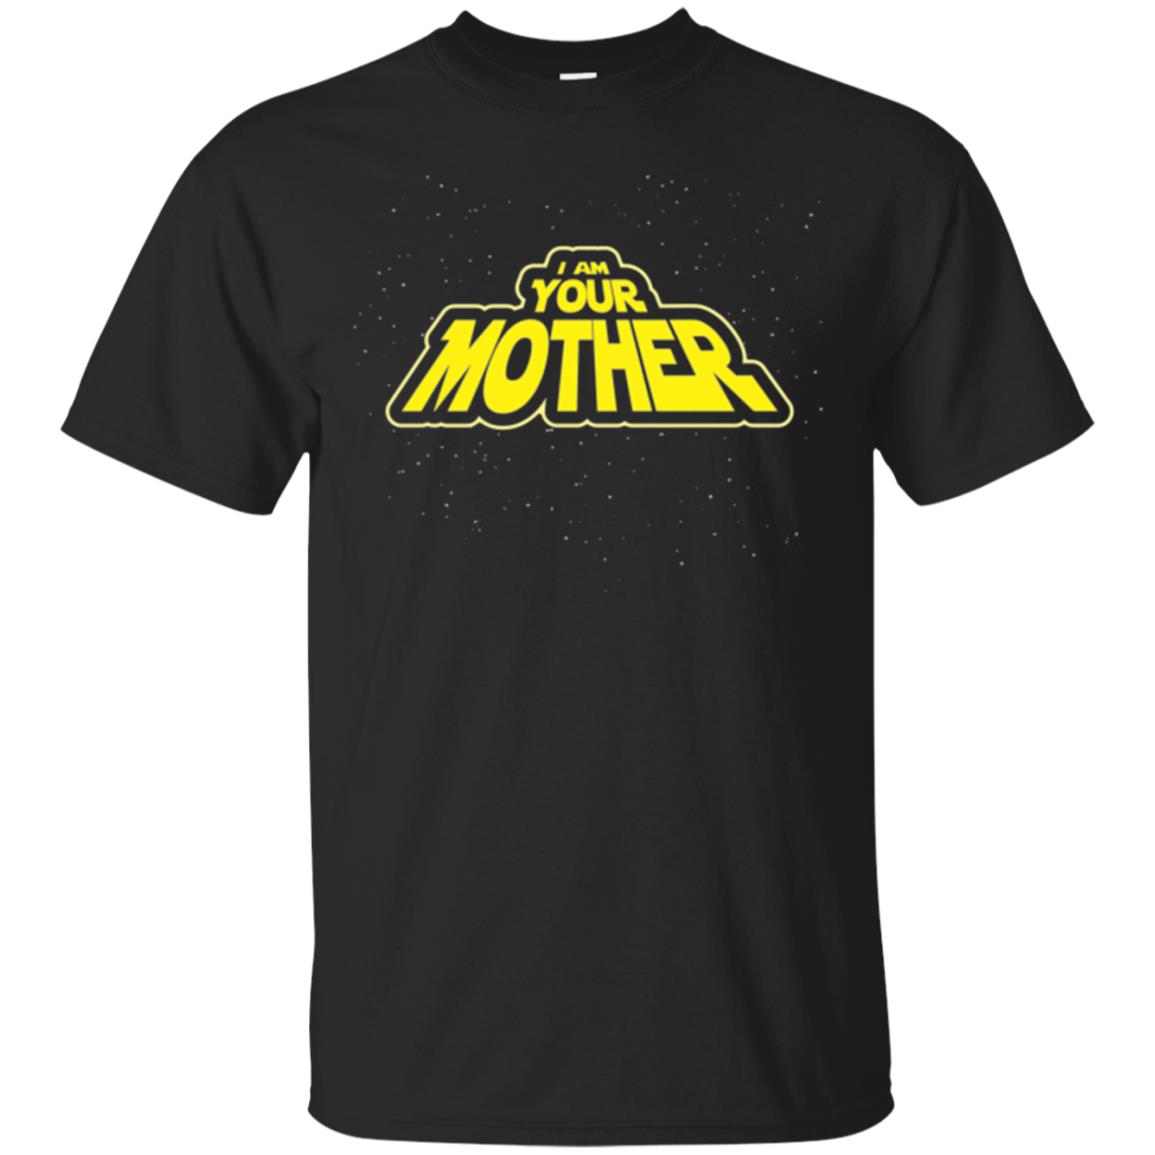 I am your Mother Graphic Tee